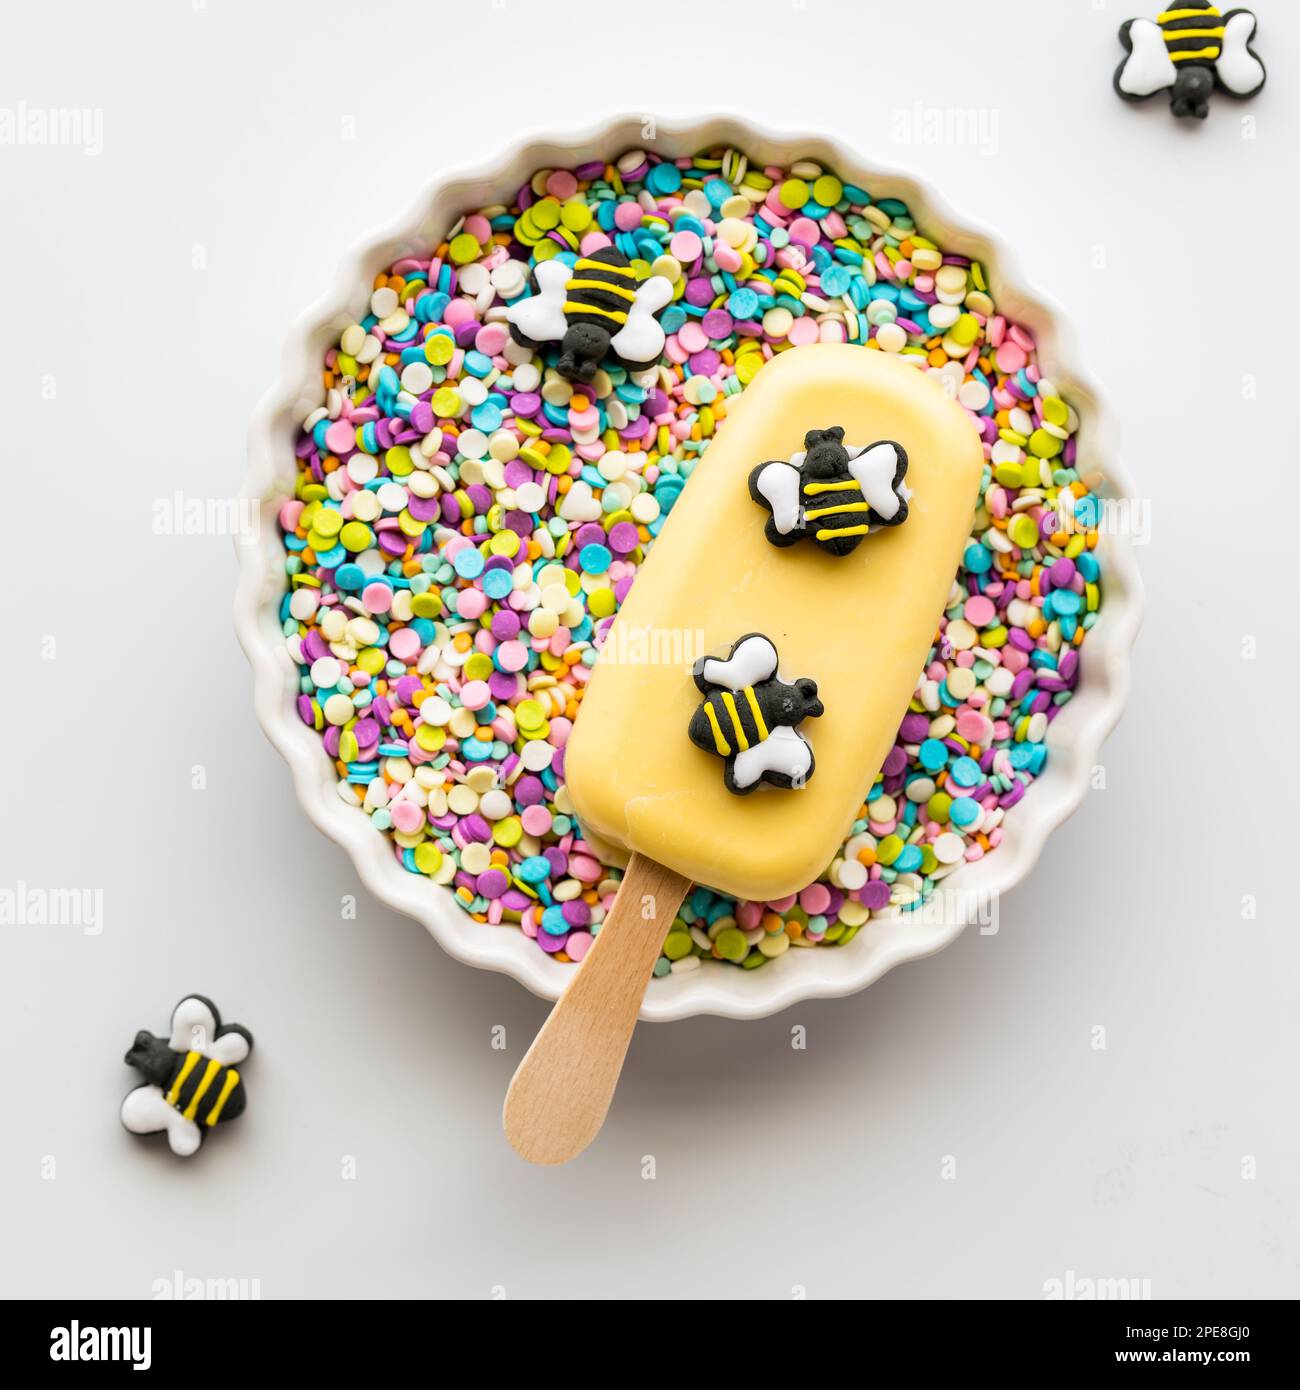 A homemade cakesicle decorated with edible bees in a bowl full of